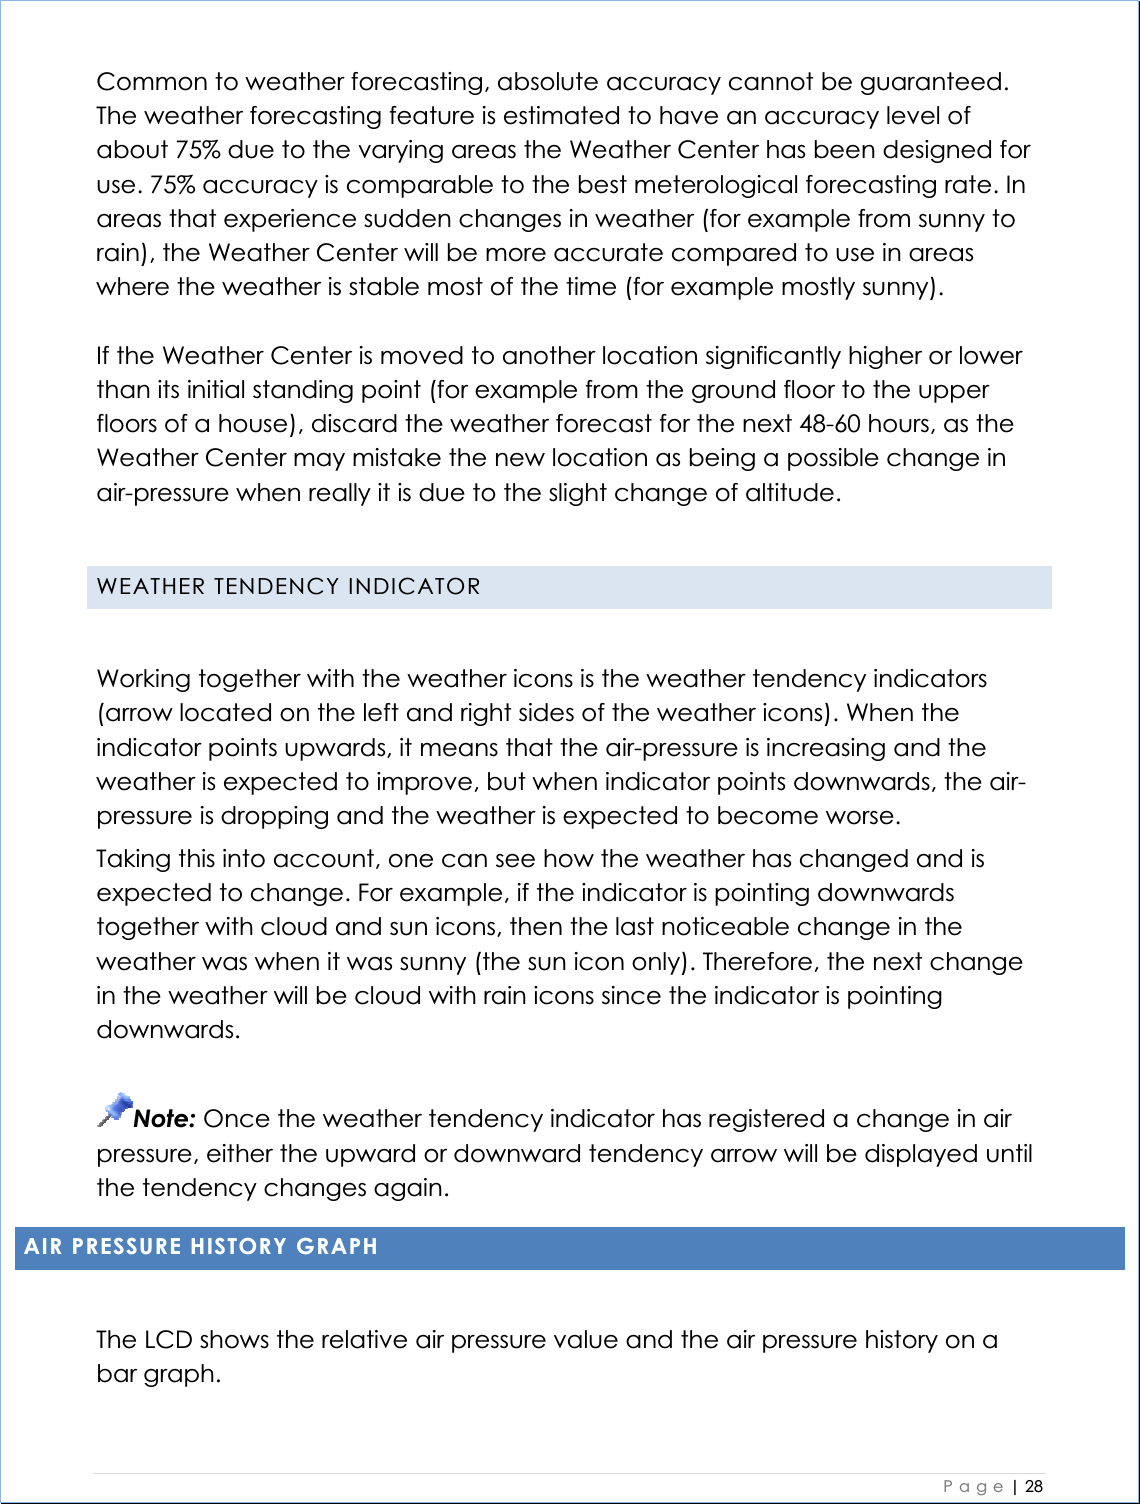    Page| 28  Common to weather forecasting, absolute accuracy cannot be guaranteed. The weather forecasting feature is estimated to have an accuracy level of about 75% due to the varying areas the Weather Center has been designed for use. 75% accuracy is comparable to the best meterological forecasting rate. In areas that experience sudden changes in weather (for example from sunny to rain), the Weather Center will be more accurate compared to use in areas where the weather is stable most of the time (for example mostly sunny). If the Weather Center is moved to another location significantly higher or lower than its initial standing point (for example from the ground floor to the upper floors of a house), discard the weather forecast for the next 48-60 hours, as the Weather Center may mistake the new location as being a possible change in air-pressure when really it is due to the slight change of altitude. WEATHER TENDENCY INDICATOR Working together with the weather icons is the weather tendency indicators (arrow located on the left and right sides of the weather icons). When the indicator points upwards, it means that the air-pressure is increasing and the weather is expected to improve, but when indicator points downwards, the air-pressure is dropping and the weather is expected to become worse. Taking this into account, one can see how the weather has changed and is expected to change. For example, if the indicator is pointing downwards together with cloud and sun icons, then the last noticeable change in the weather was when it was sunny (the sun icon only). Therefore, the next change in the weather will be cloud with rain icons since the indicator is pointing downwards. Note: Once the weather tendency indicator has registered a change in air pressure, either the upward or downward tendency arrow will be displayed until the tendency changes again. AIR PRESSURE HISTORY GRAPH The LCD shows the relative air pressure value and the air pressure history on a bar graph. 